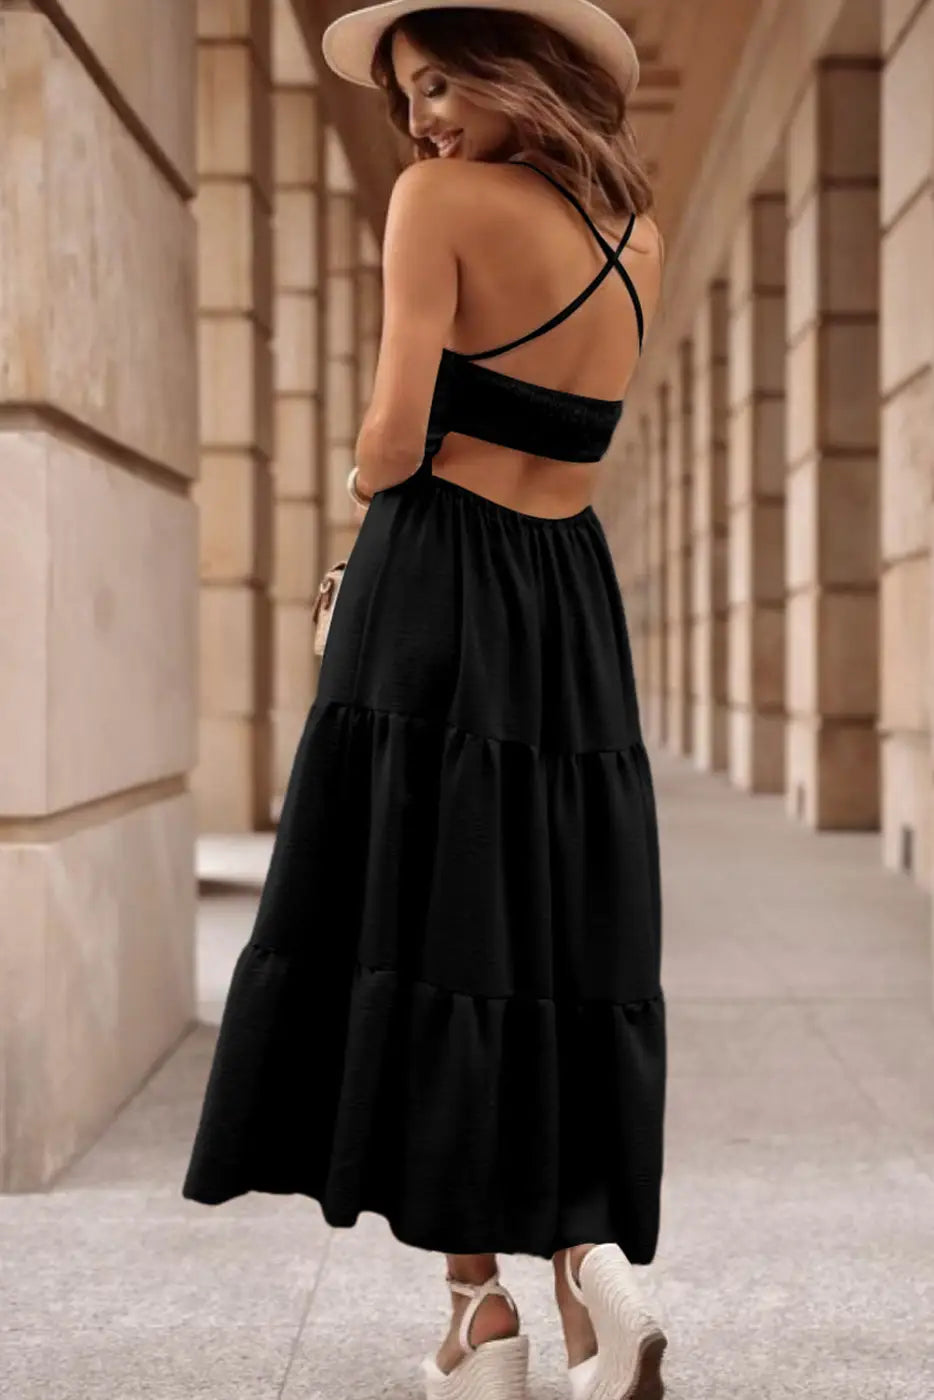 Black maxi dress - crossover backless bodice tiered - dresses